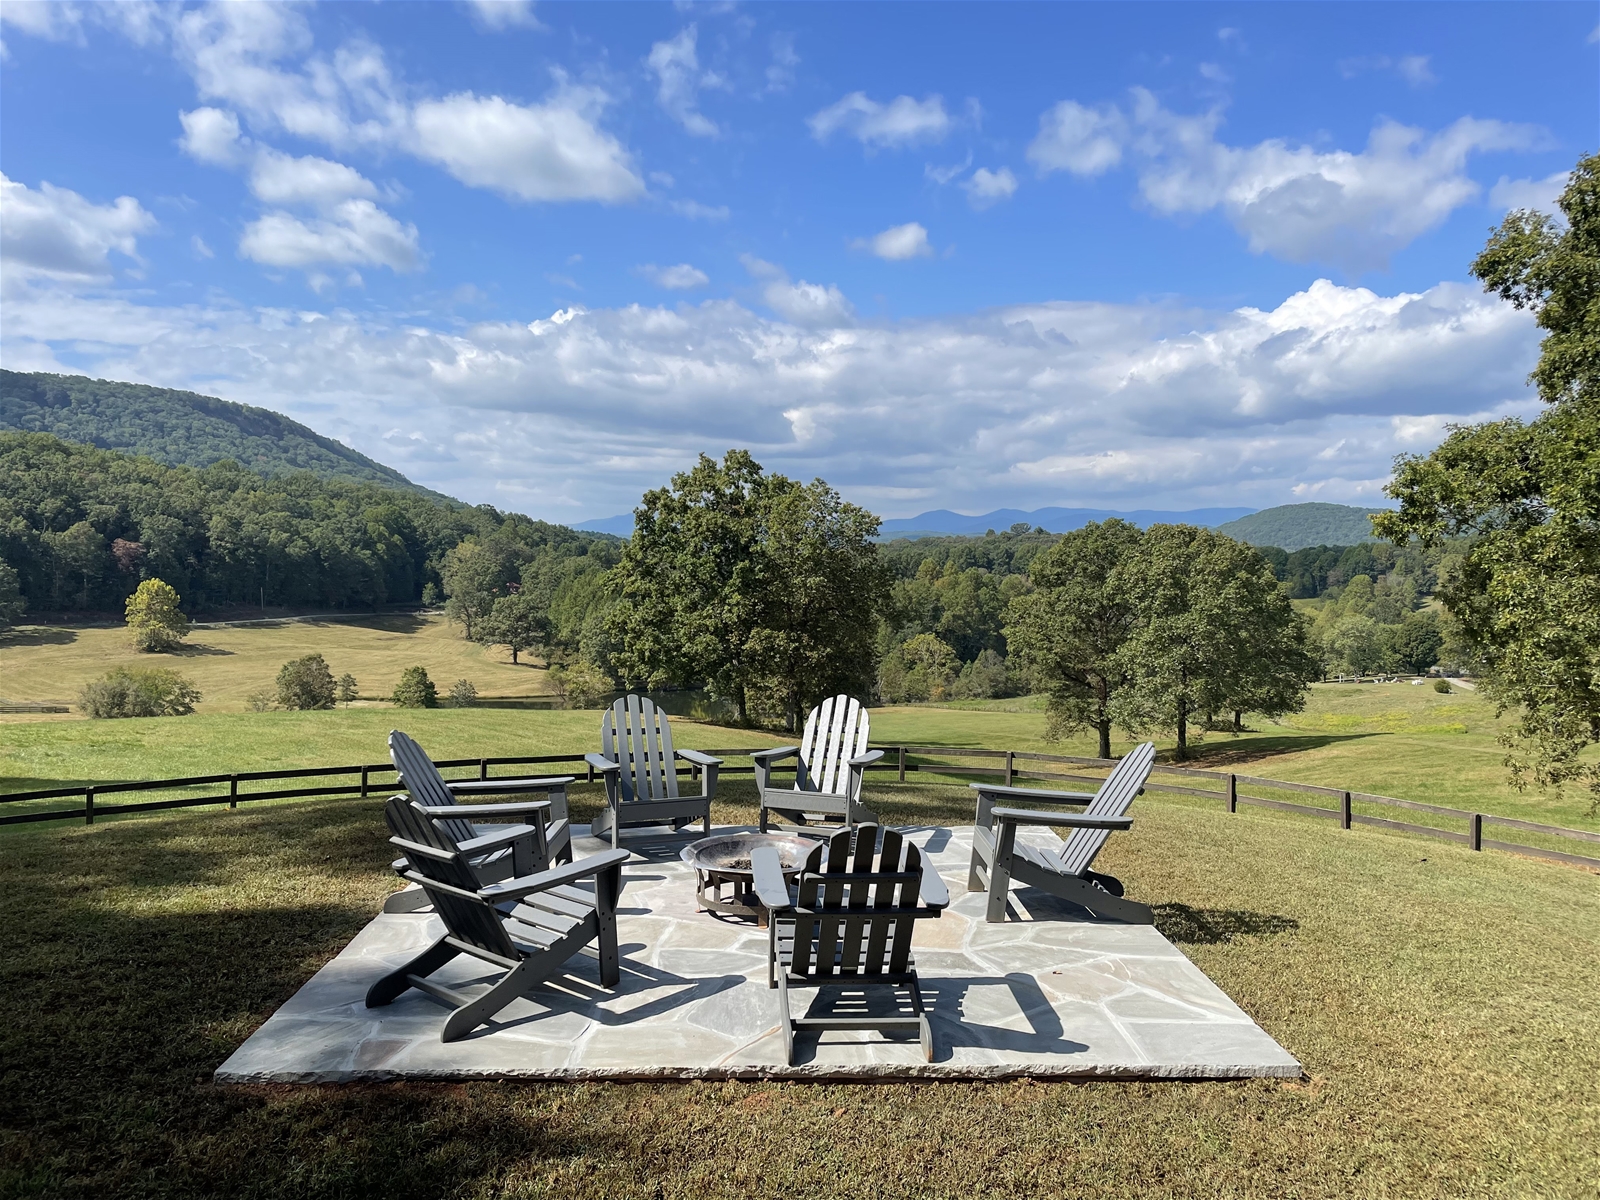 Sautee Valley View, rental home with gorgeous valley and mountain views near Helen, Ga.